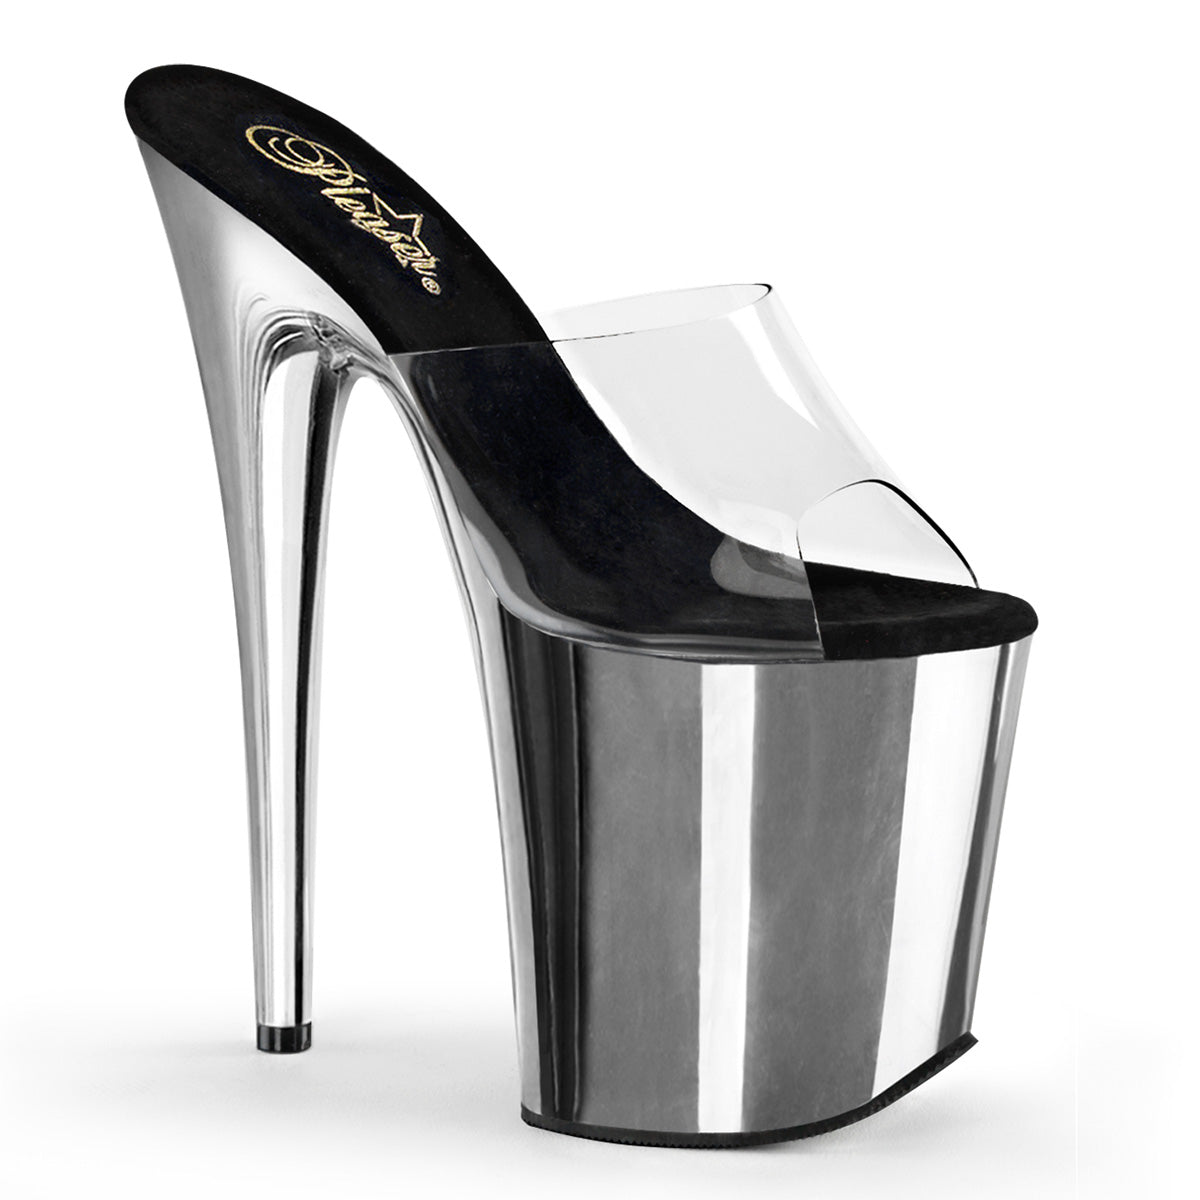 FLAMINGO-801 8" Heel ClearSilver Chrome Stripper Shoes